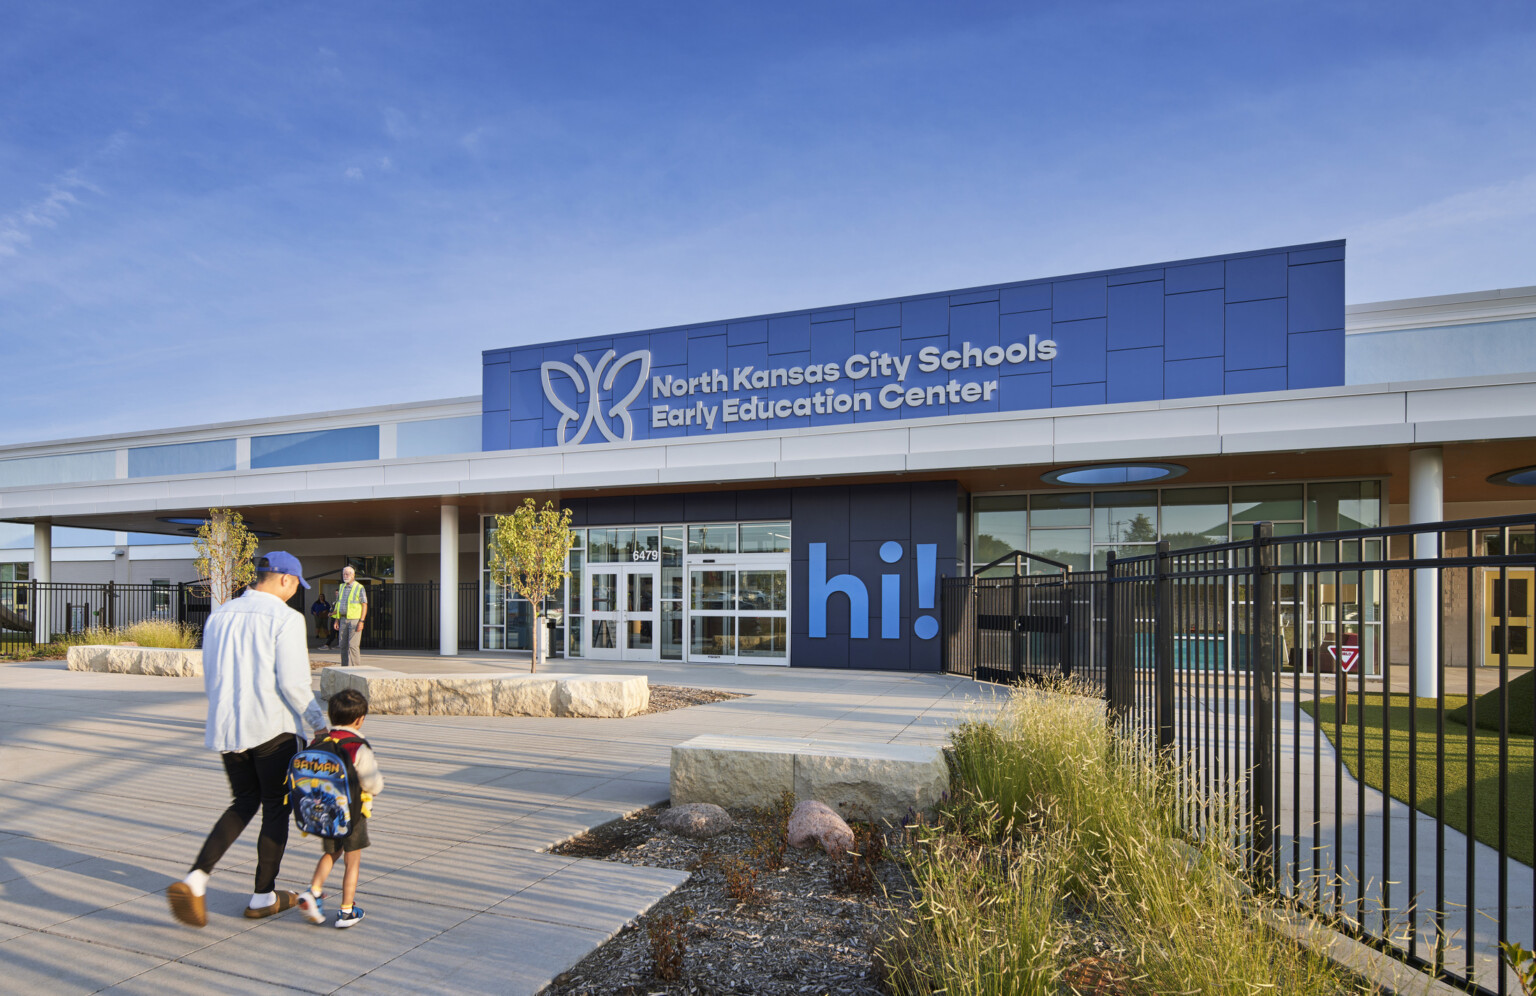 North Kansas City School Early Education Center exterior, a two tone blue facade, large "Hi!" mural by entry